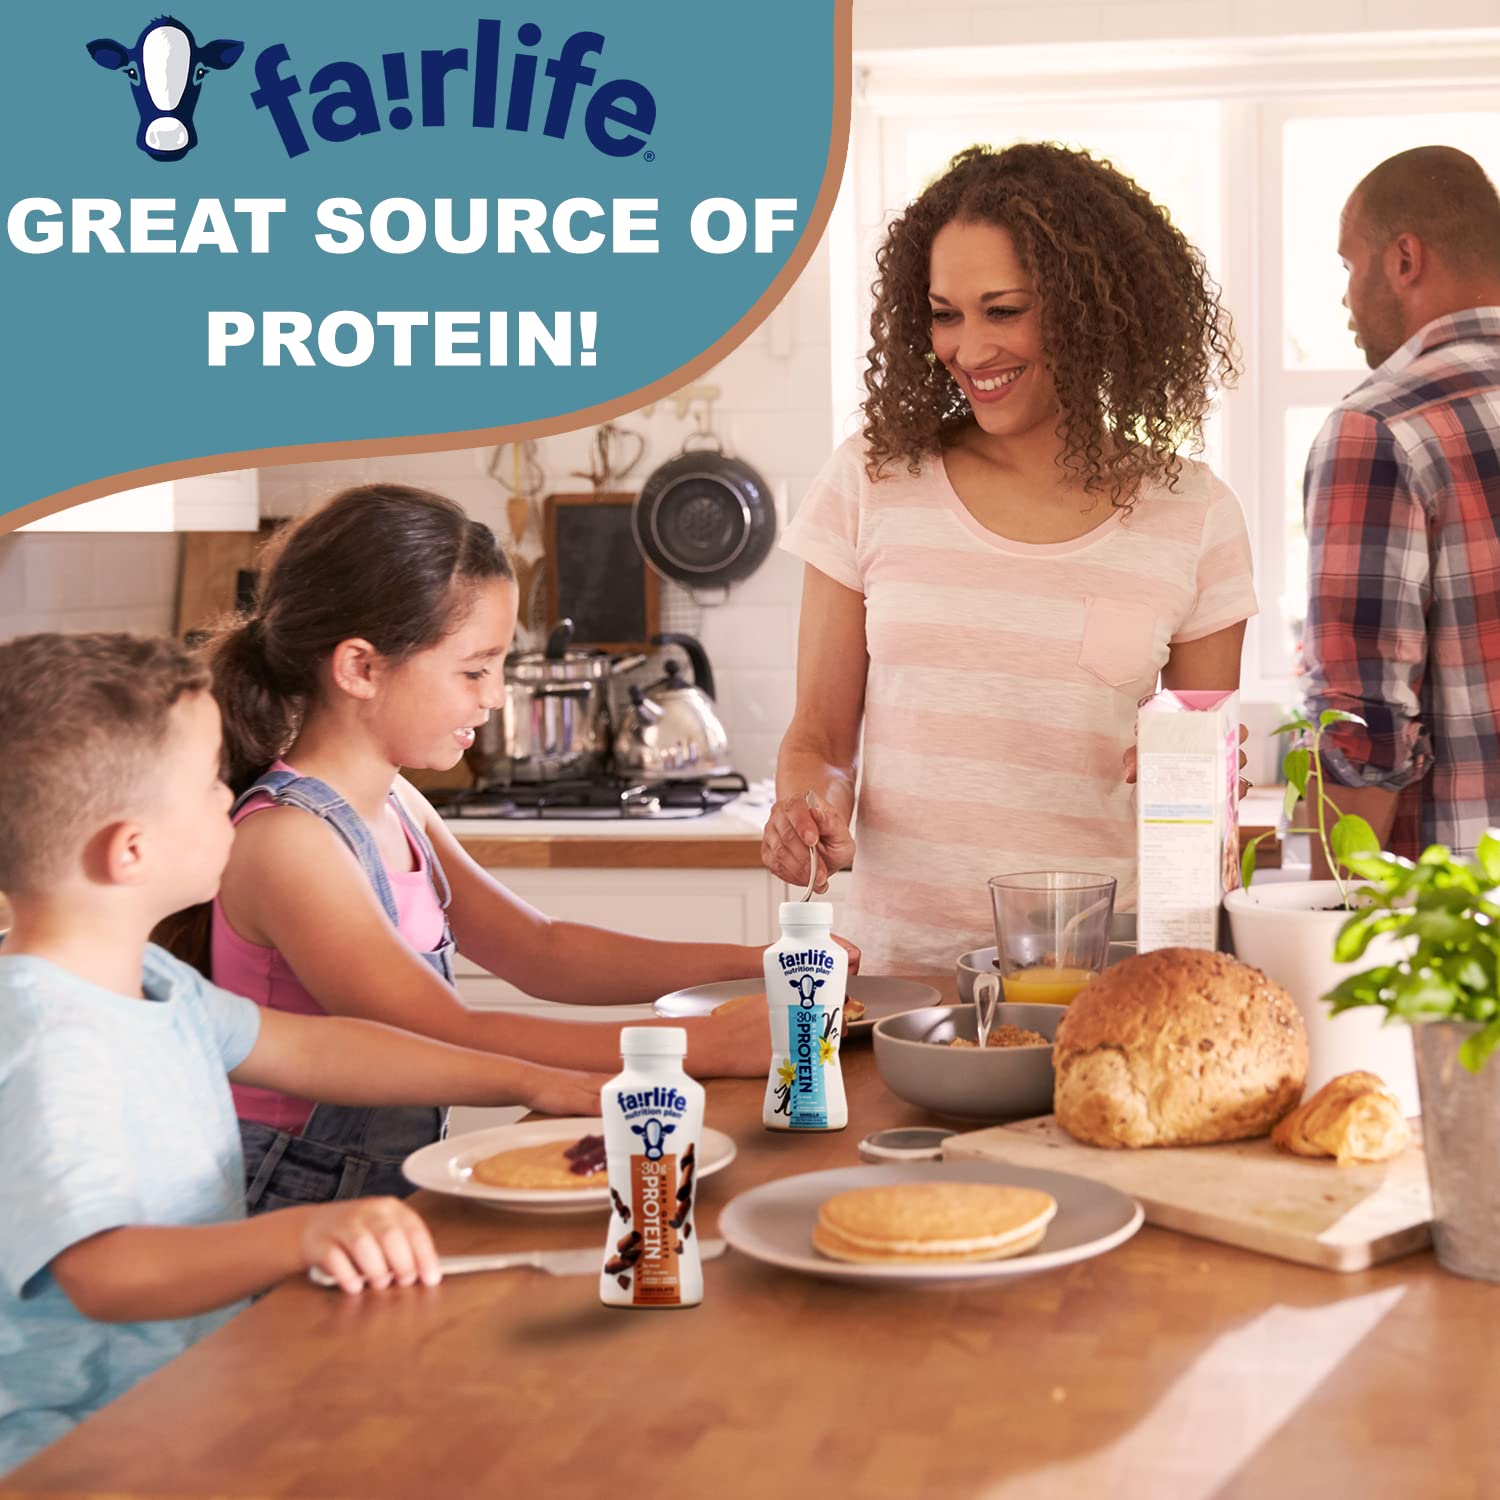 Wholesale prices with free shipping all over United States Fairlife Nutrition Protein Shakes - Pack of 12 | 30g Protein, Low Sugar, Lactose-Free | Delicious Vanilla, Chocolate, Salted Caramel, and Strawberry Flavors 11.5 fl., oz. (In KozyHome Packaging) (Chocolate) - Steven Deals